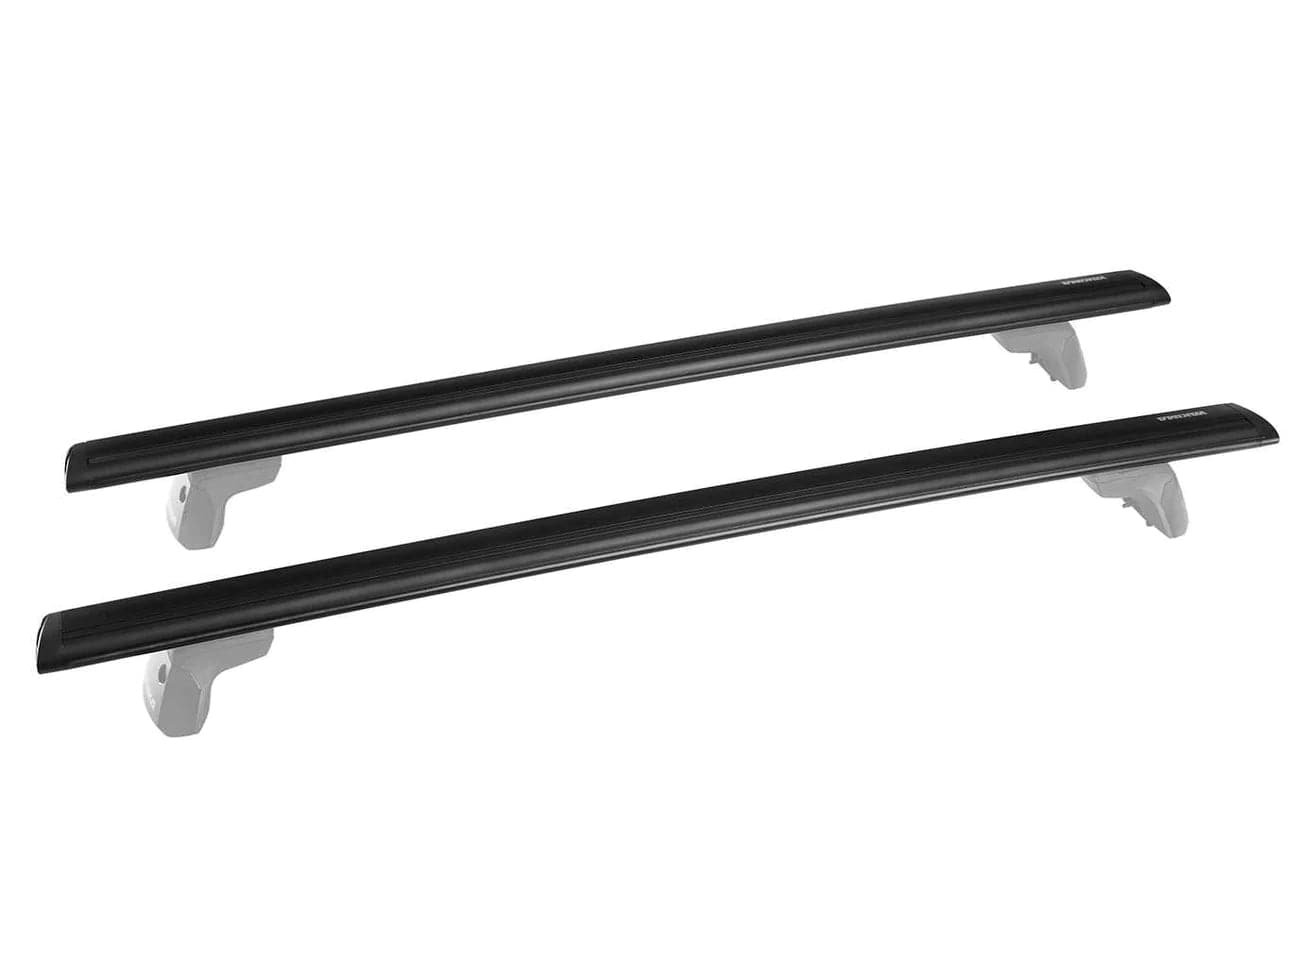 A pair of Yakima JetStream Crossbar roof rails on a white background.